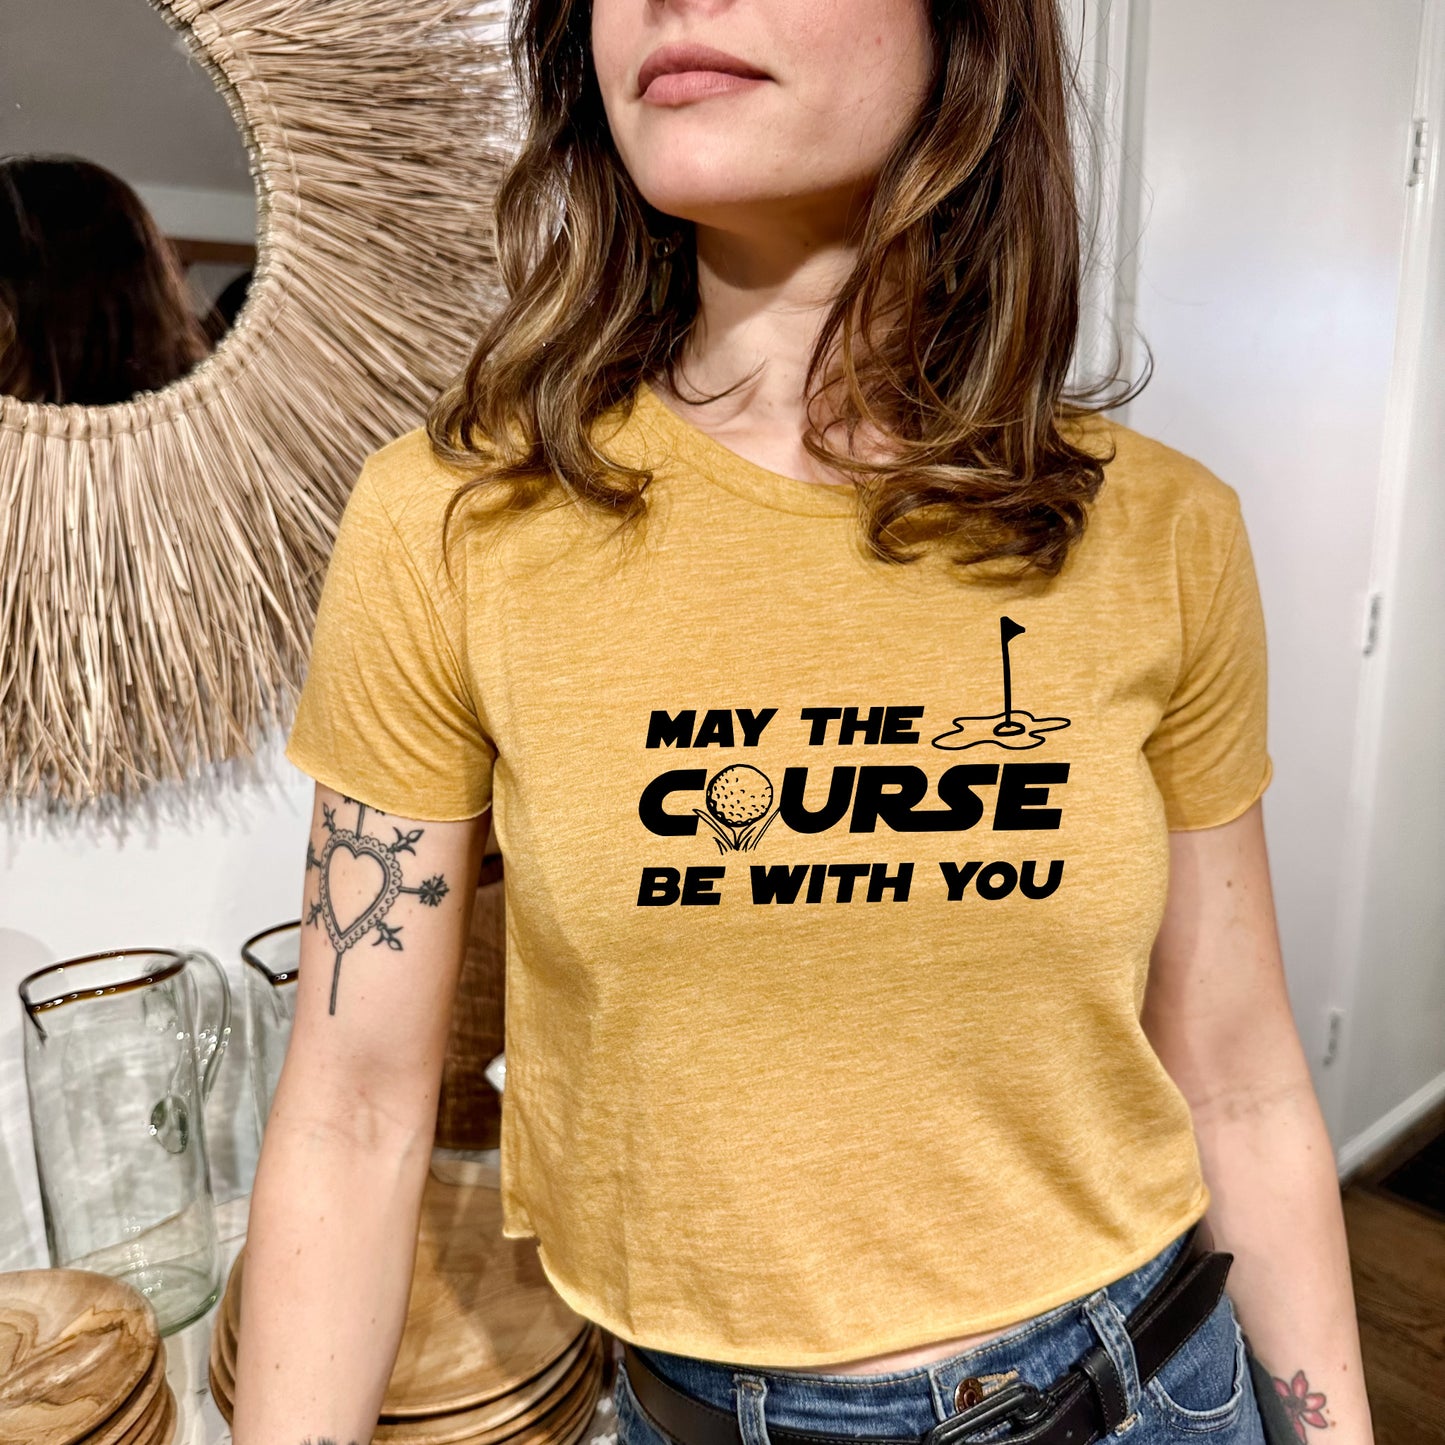 a woman wearing a yellow t - shirt that says may the course be with you